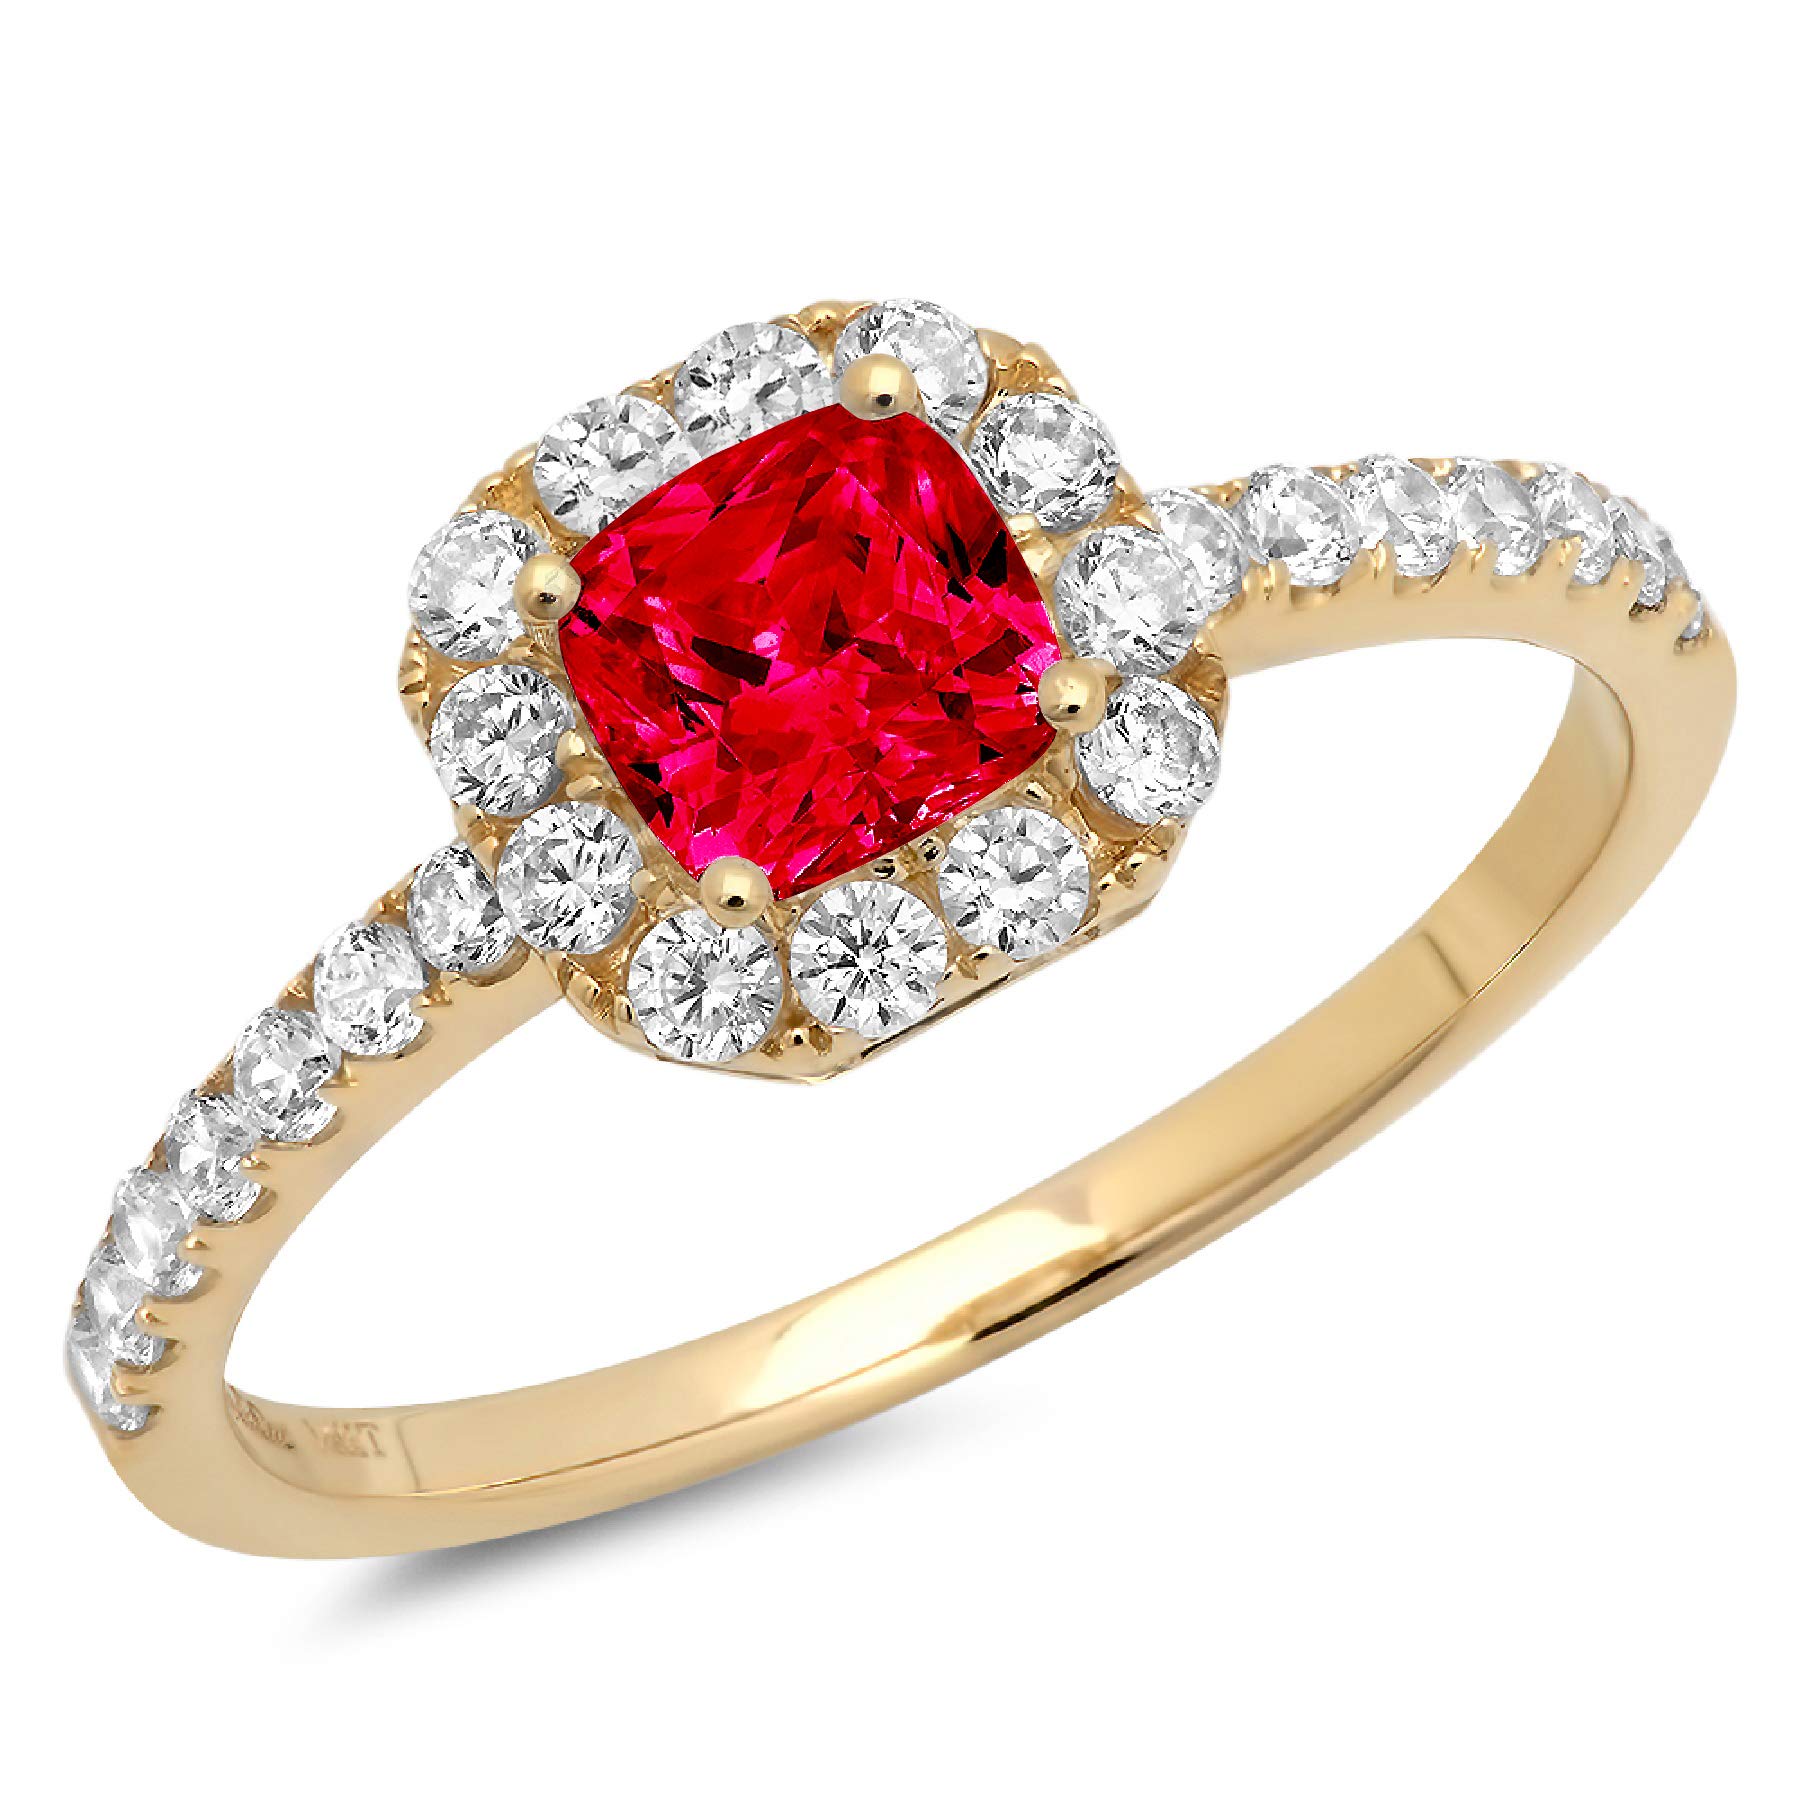 Clara Pucci 1 ct Brilliant Princess Cut Solitaire with accent Flawless Simulated CZ Red Ruby VVS1 Designer Modern Statement Ring Solid 14k Yellow Gold